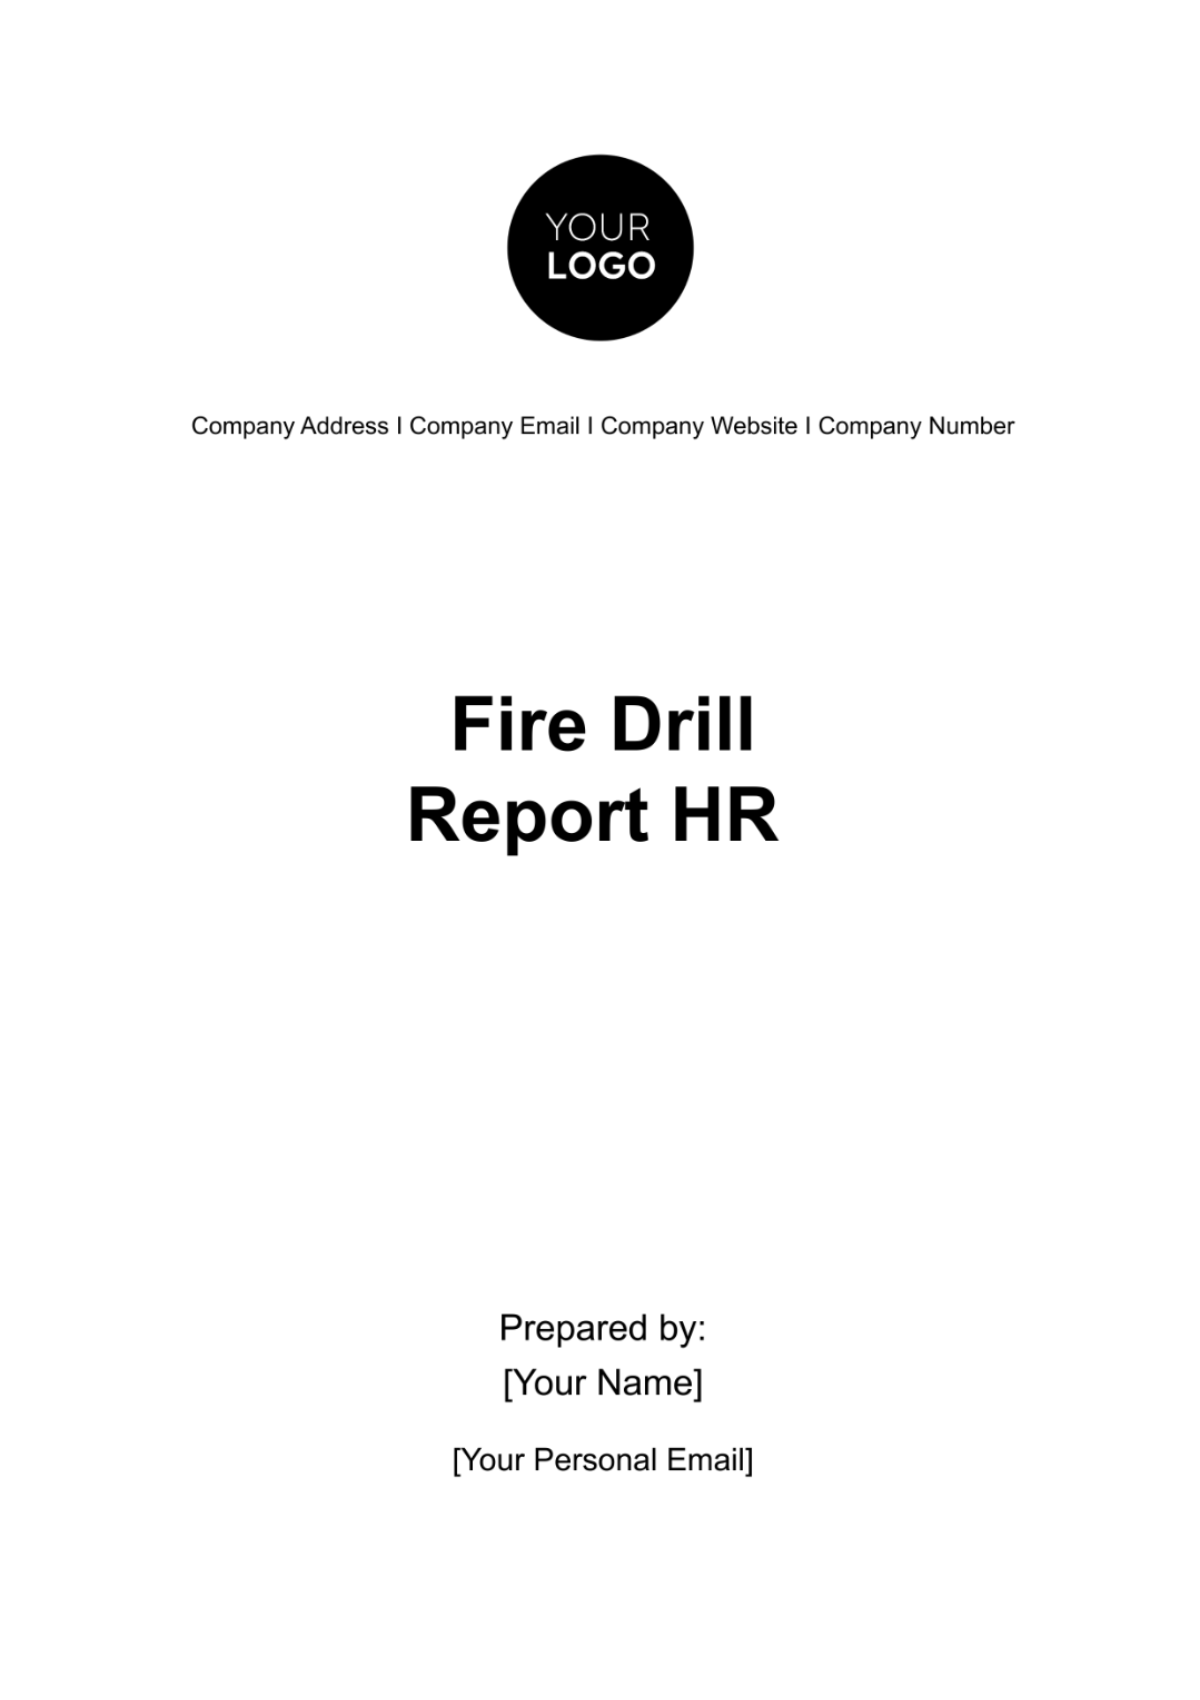 Free Fire Drill Report HR Template